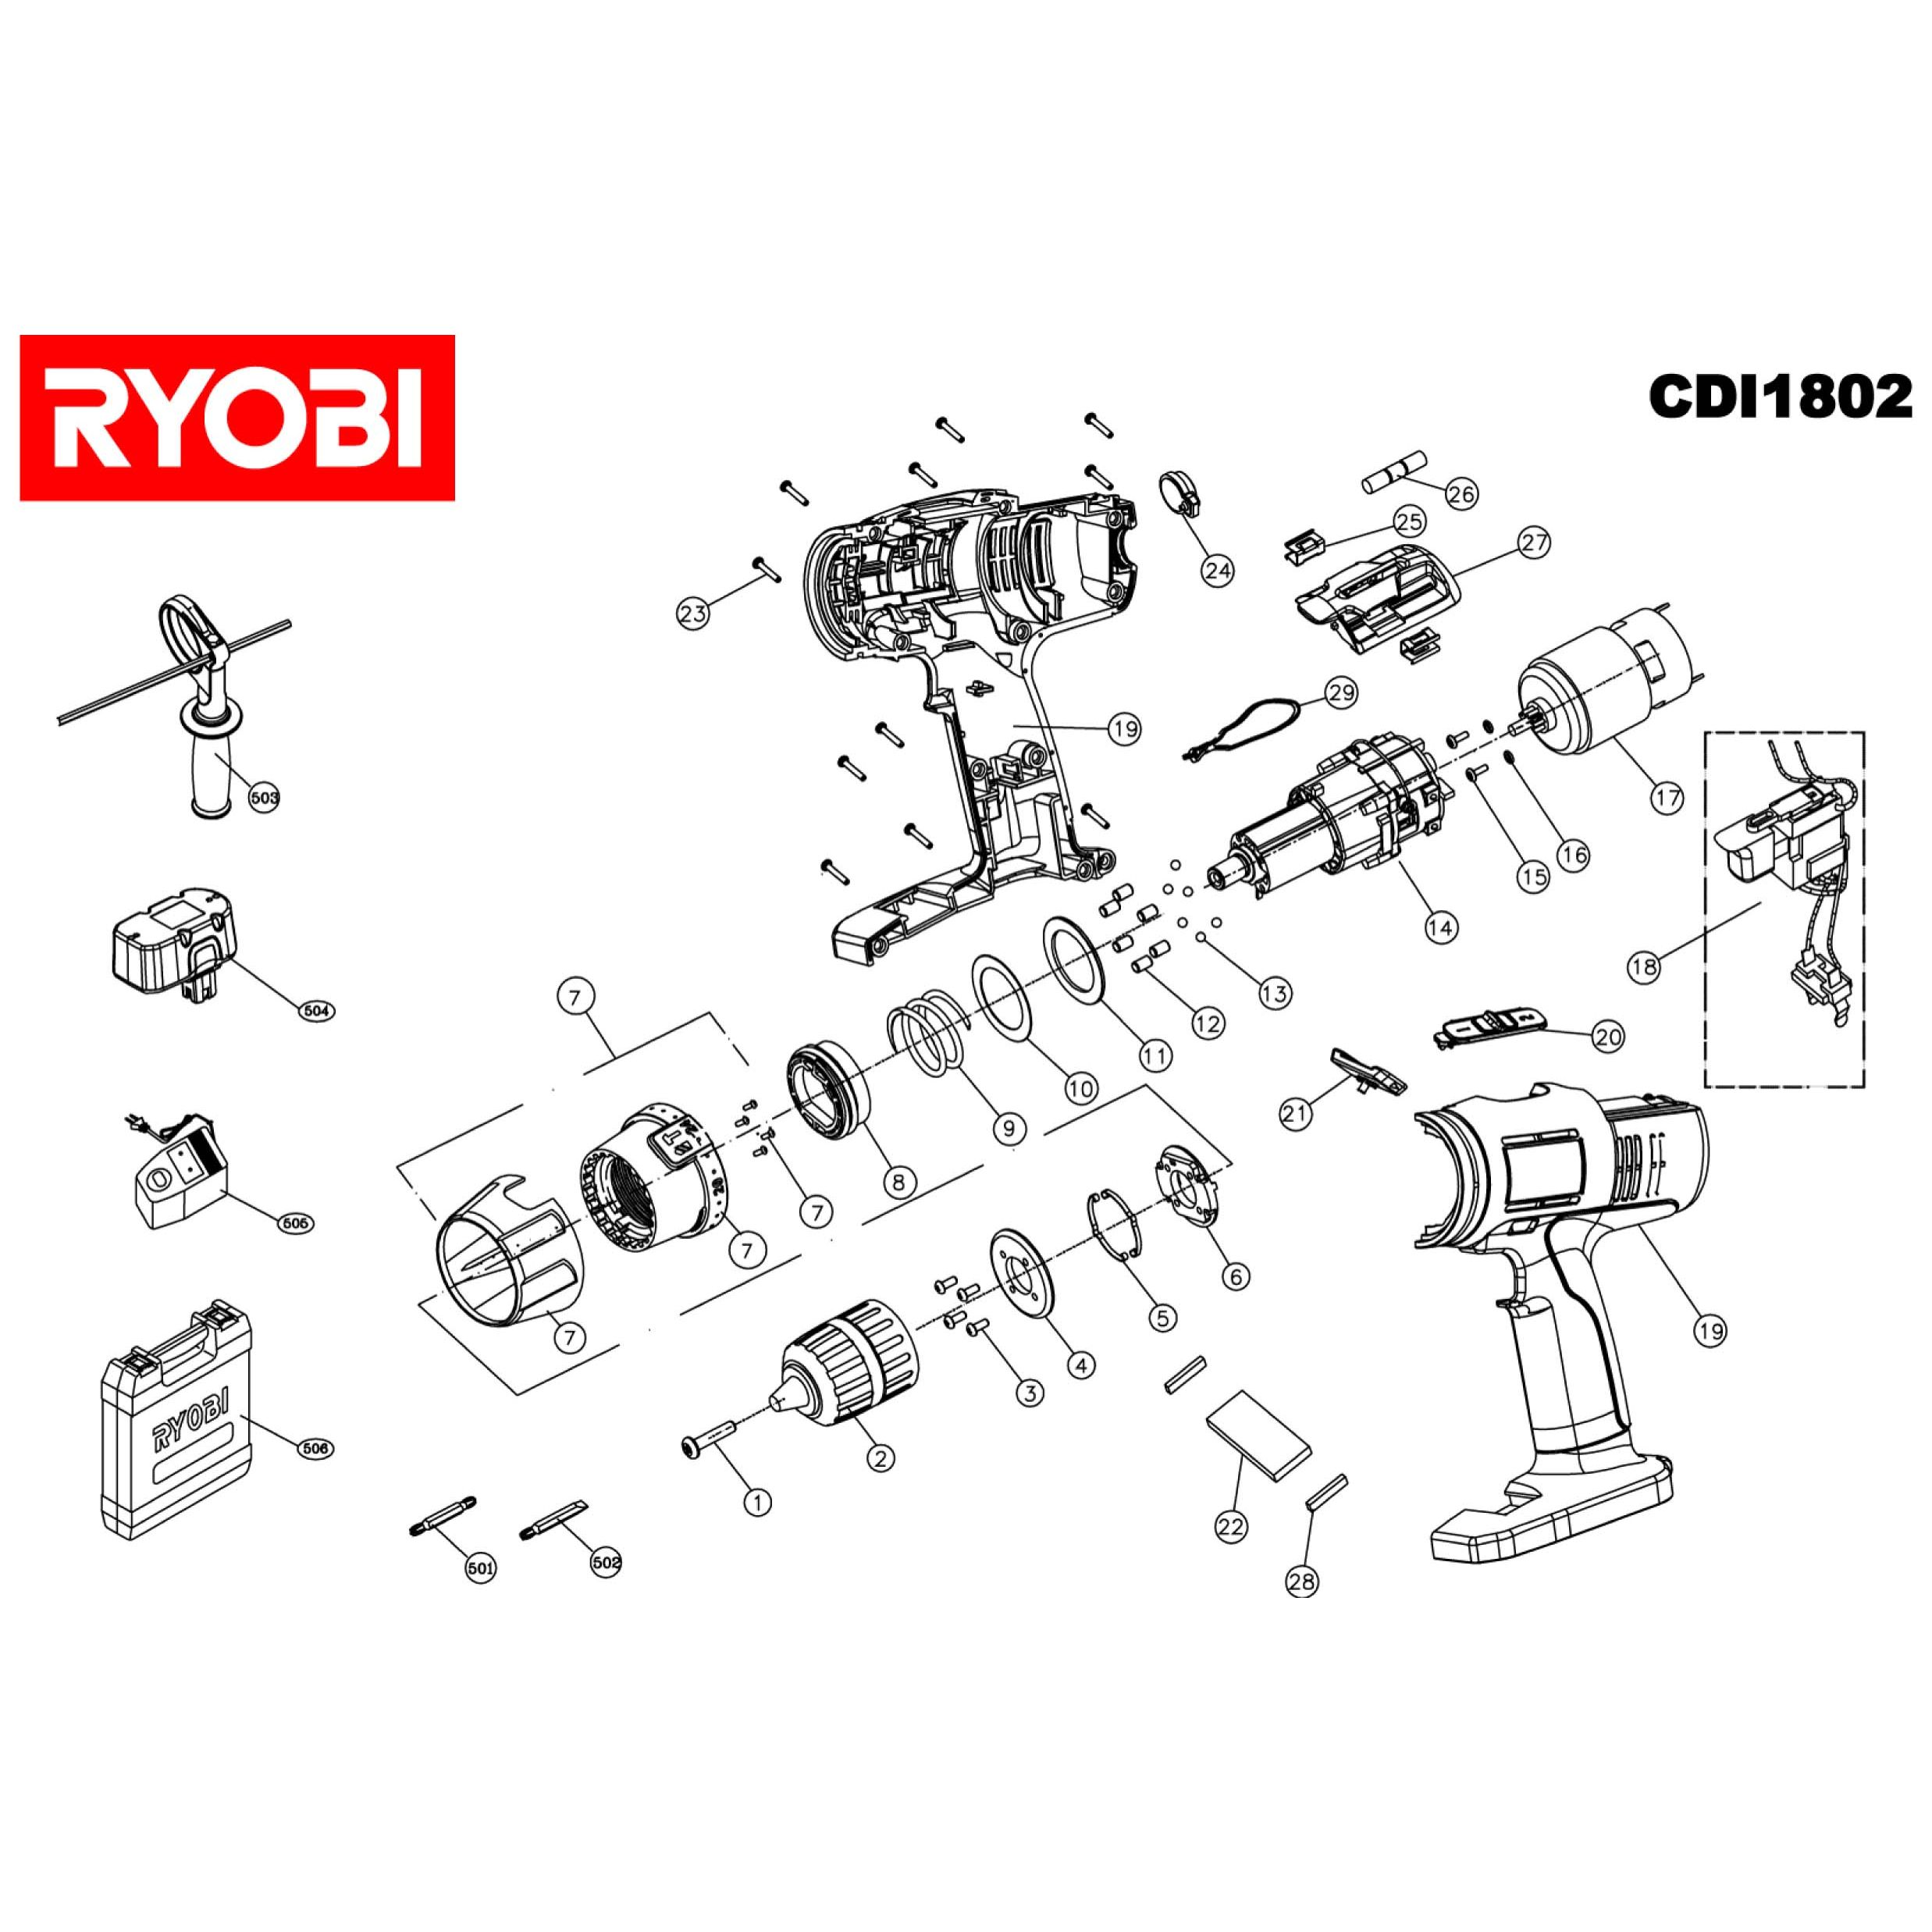 New Genuine OEM 200216019 ARMATURE ASSEMBLY Ryobi Drill Replacement Part 